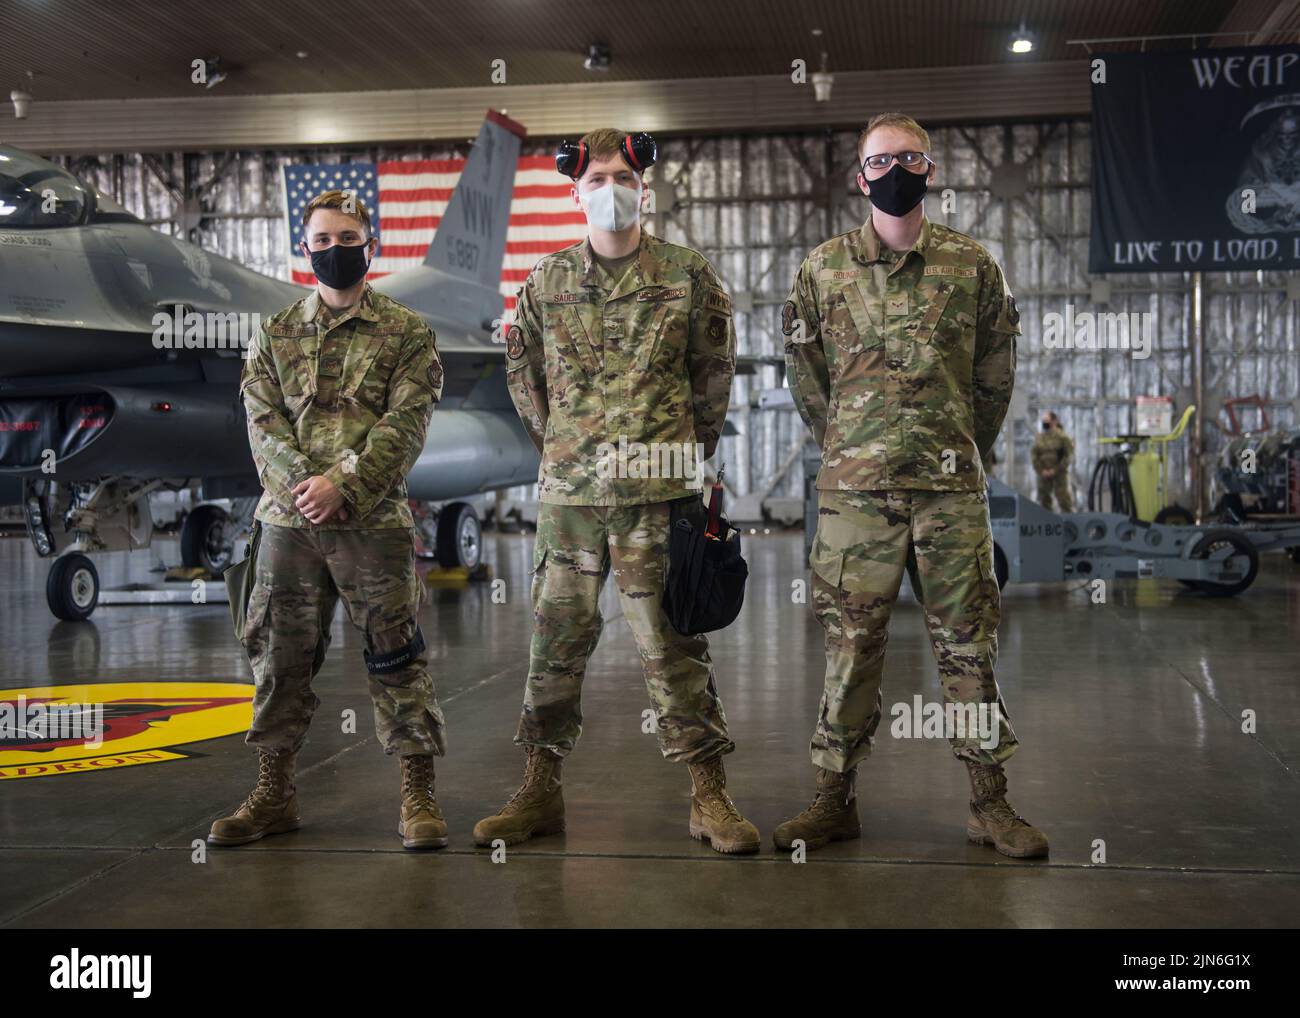 U.S. Air Force Staff Sgt. David Botterill (left), a weapons load team chief, Airmen 1st Class Braedon Sauer (center) and Cole Rounds (right), weapons load team members, from the 13th Aircraft Maintenance Unit, stand in front of an F-16 Fighting Falcon during the second quarter load competition at Misawa Air Base, Japan, July 16, 2021. It takes three members to prepare the aircraft, checklist the technical orders and attach the weapons onto the aircraft during the load competition as efficiently as possible. (U.S. Air Force photo by Airman 1st Class Leon Redfern) Stock Photo